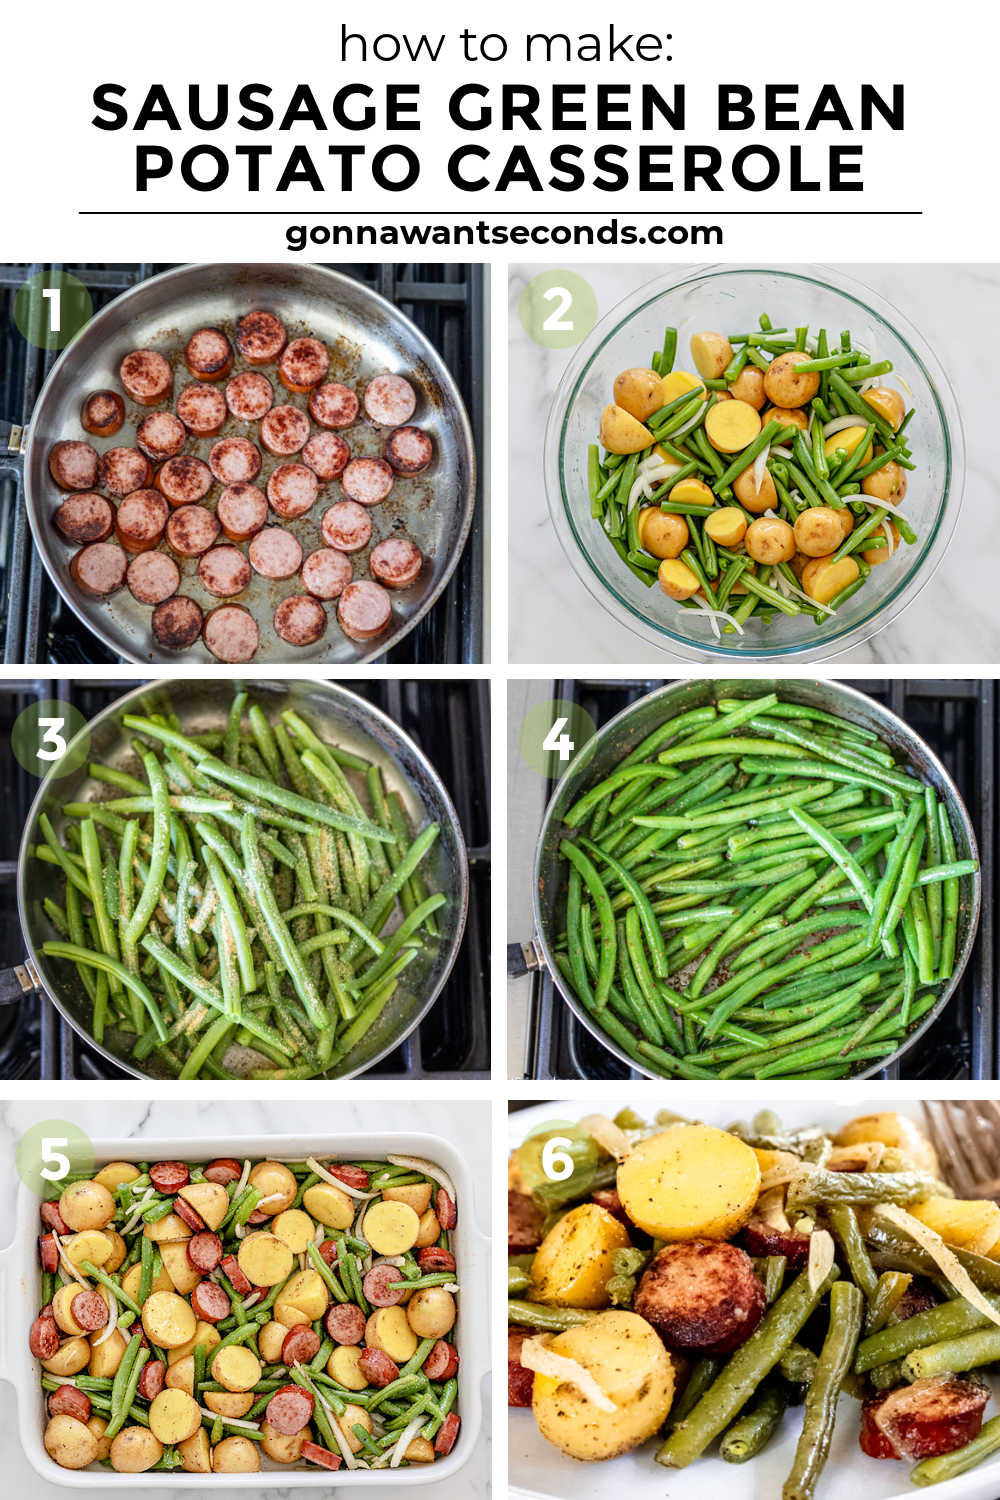 Step by step how to make sausage green bean and potato casserole